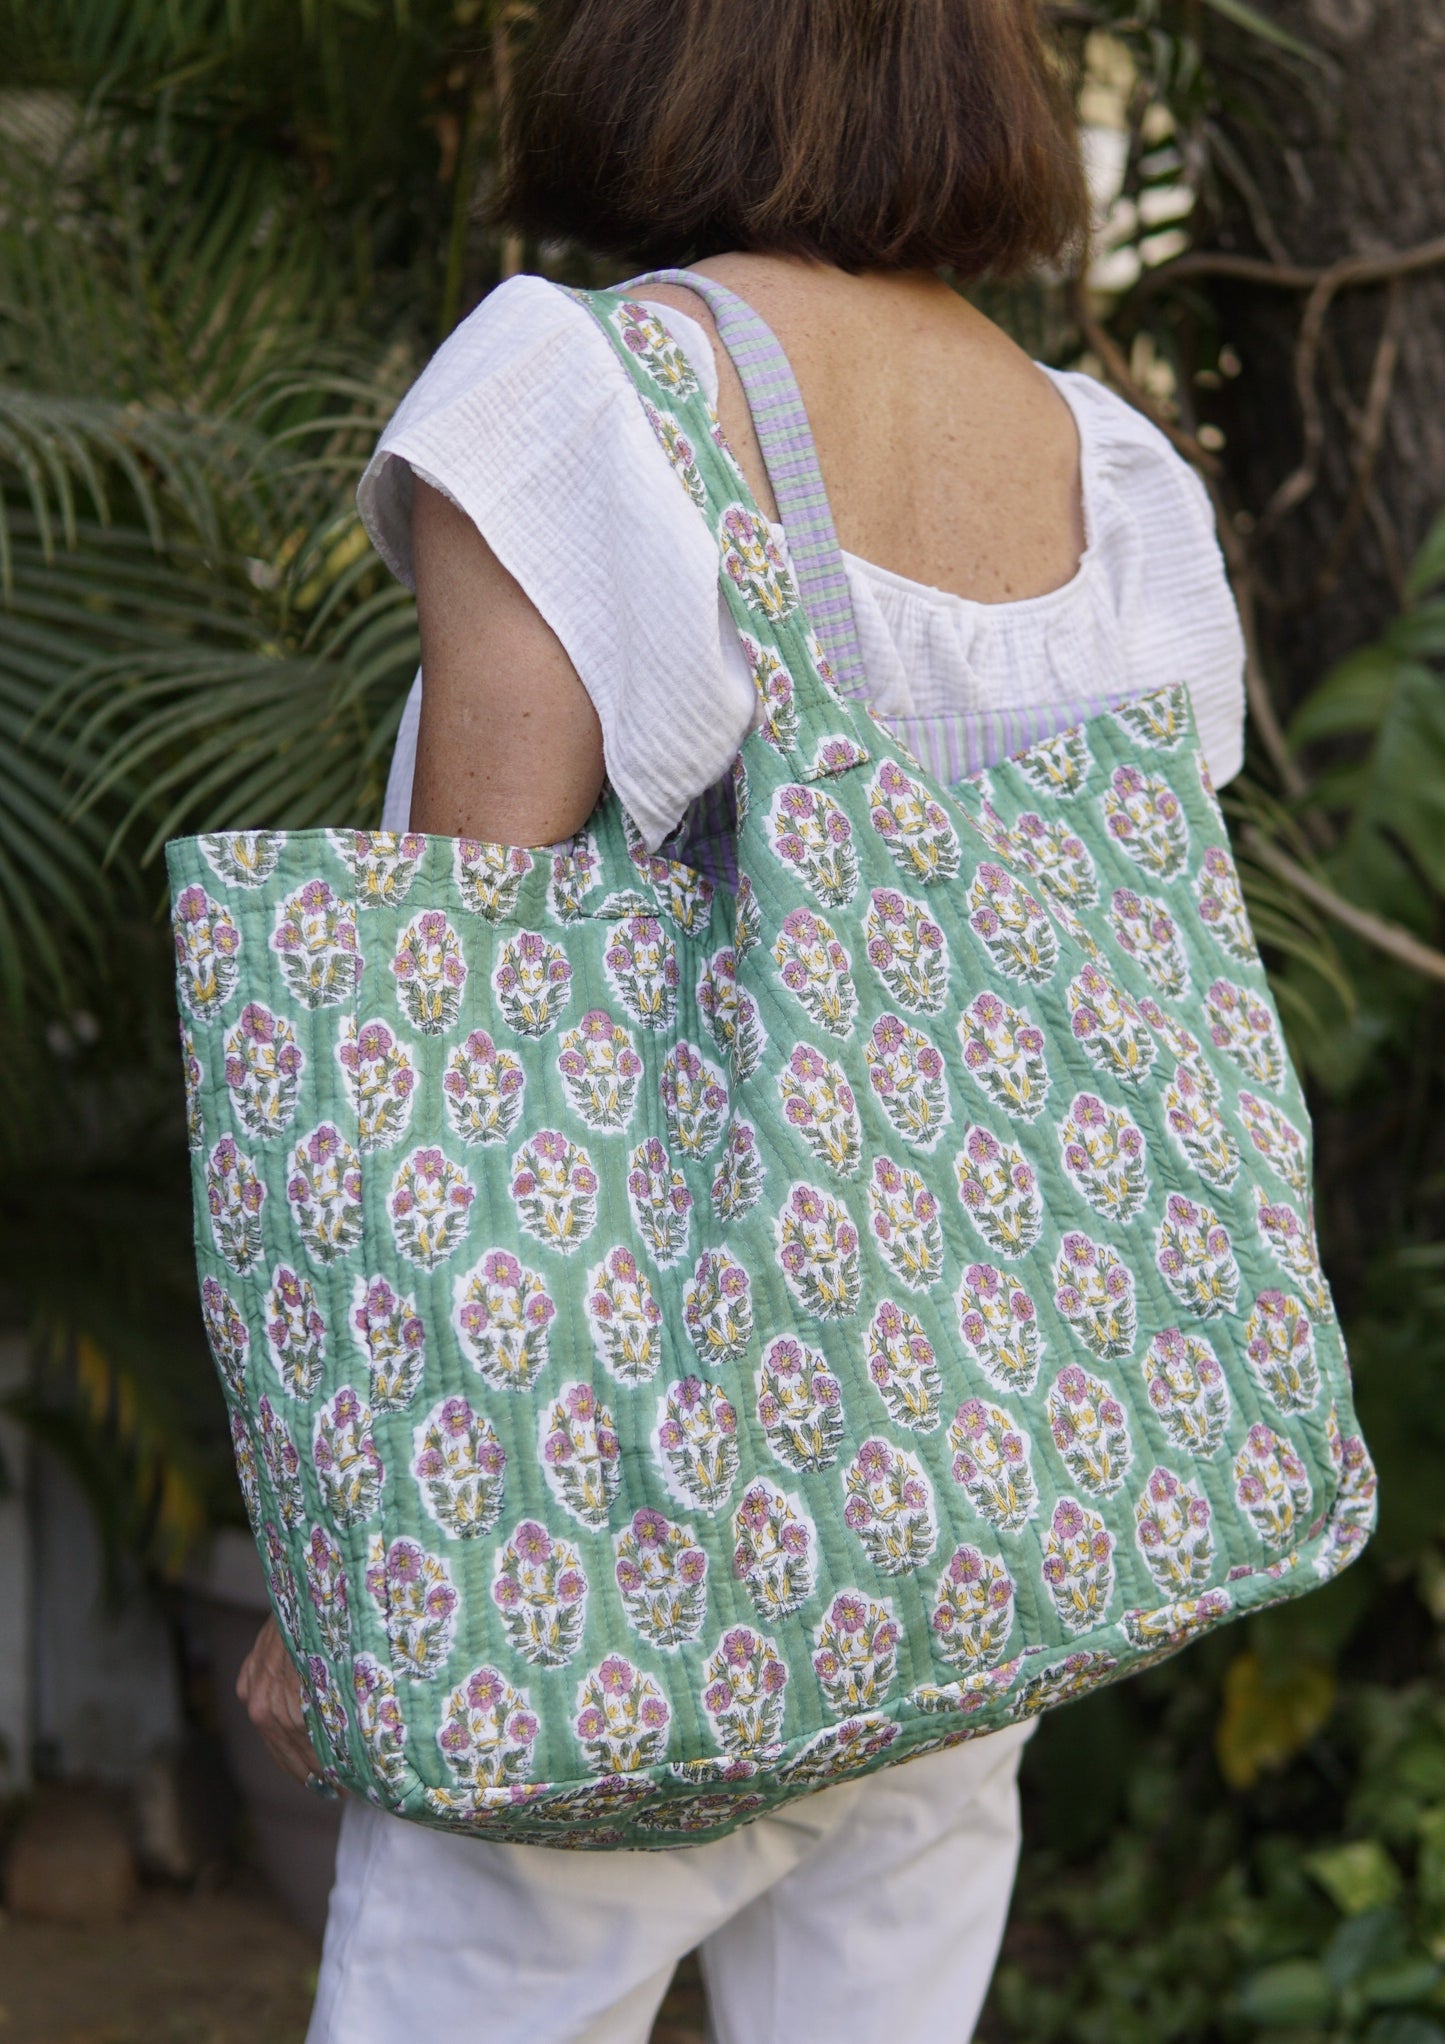 Beach bag, Green and ;ilac Provencale print with coordinating lining, X Large cotton, block printed tote bag. Handmade. 